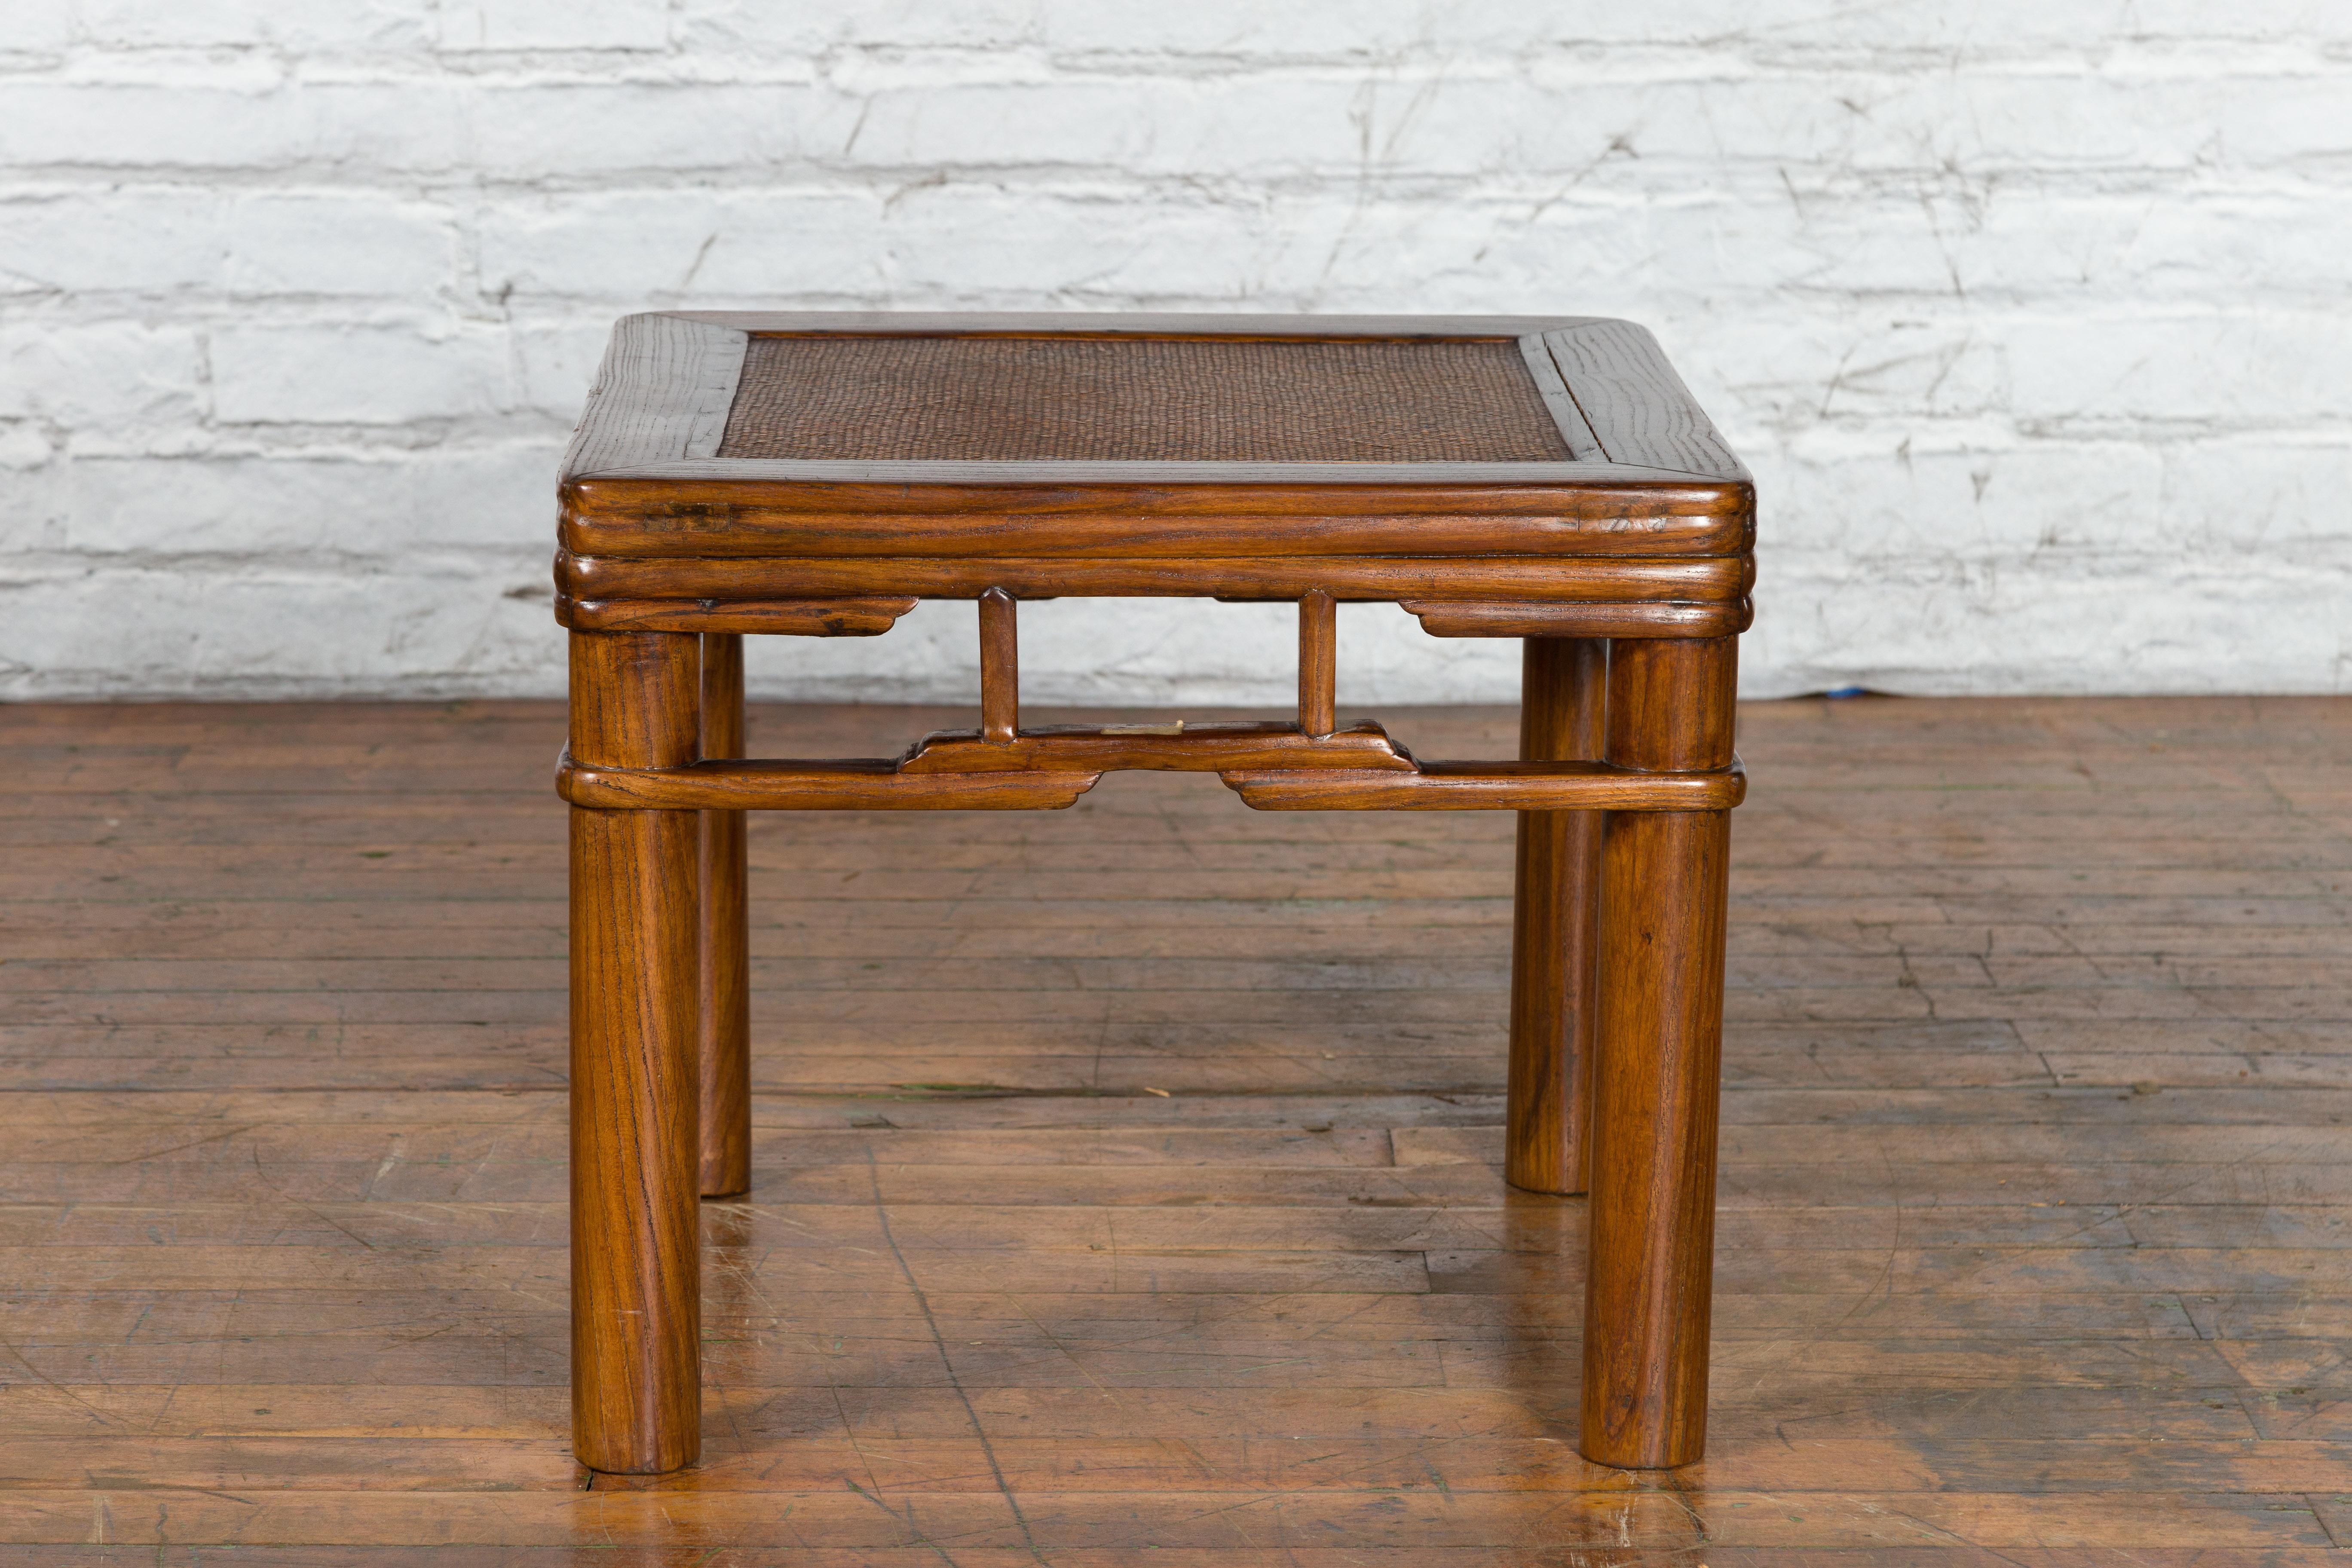 Qing Dynasty 19th Century Chinese Wooden Side Table with Pillar Strut Motifs For Sale 8